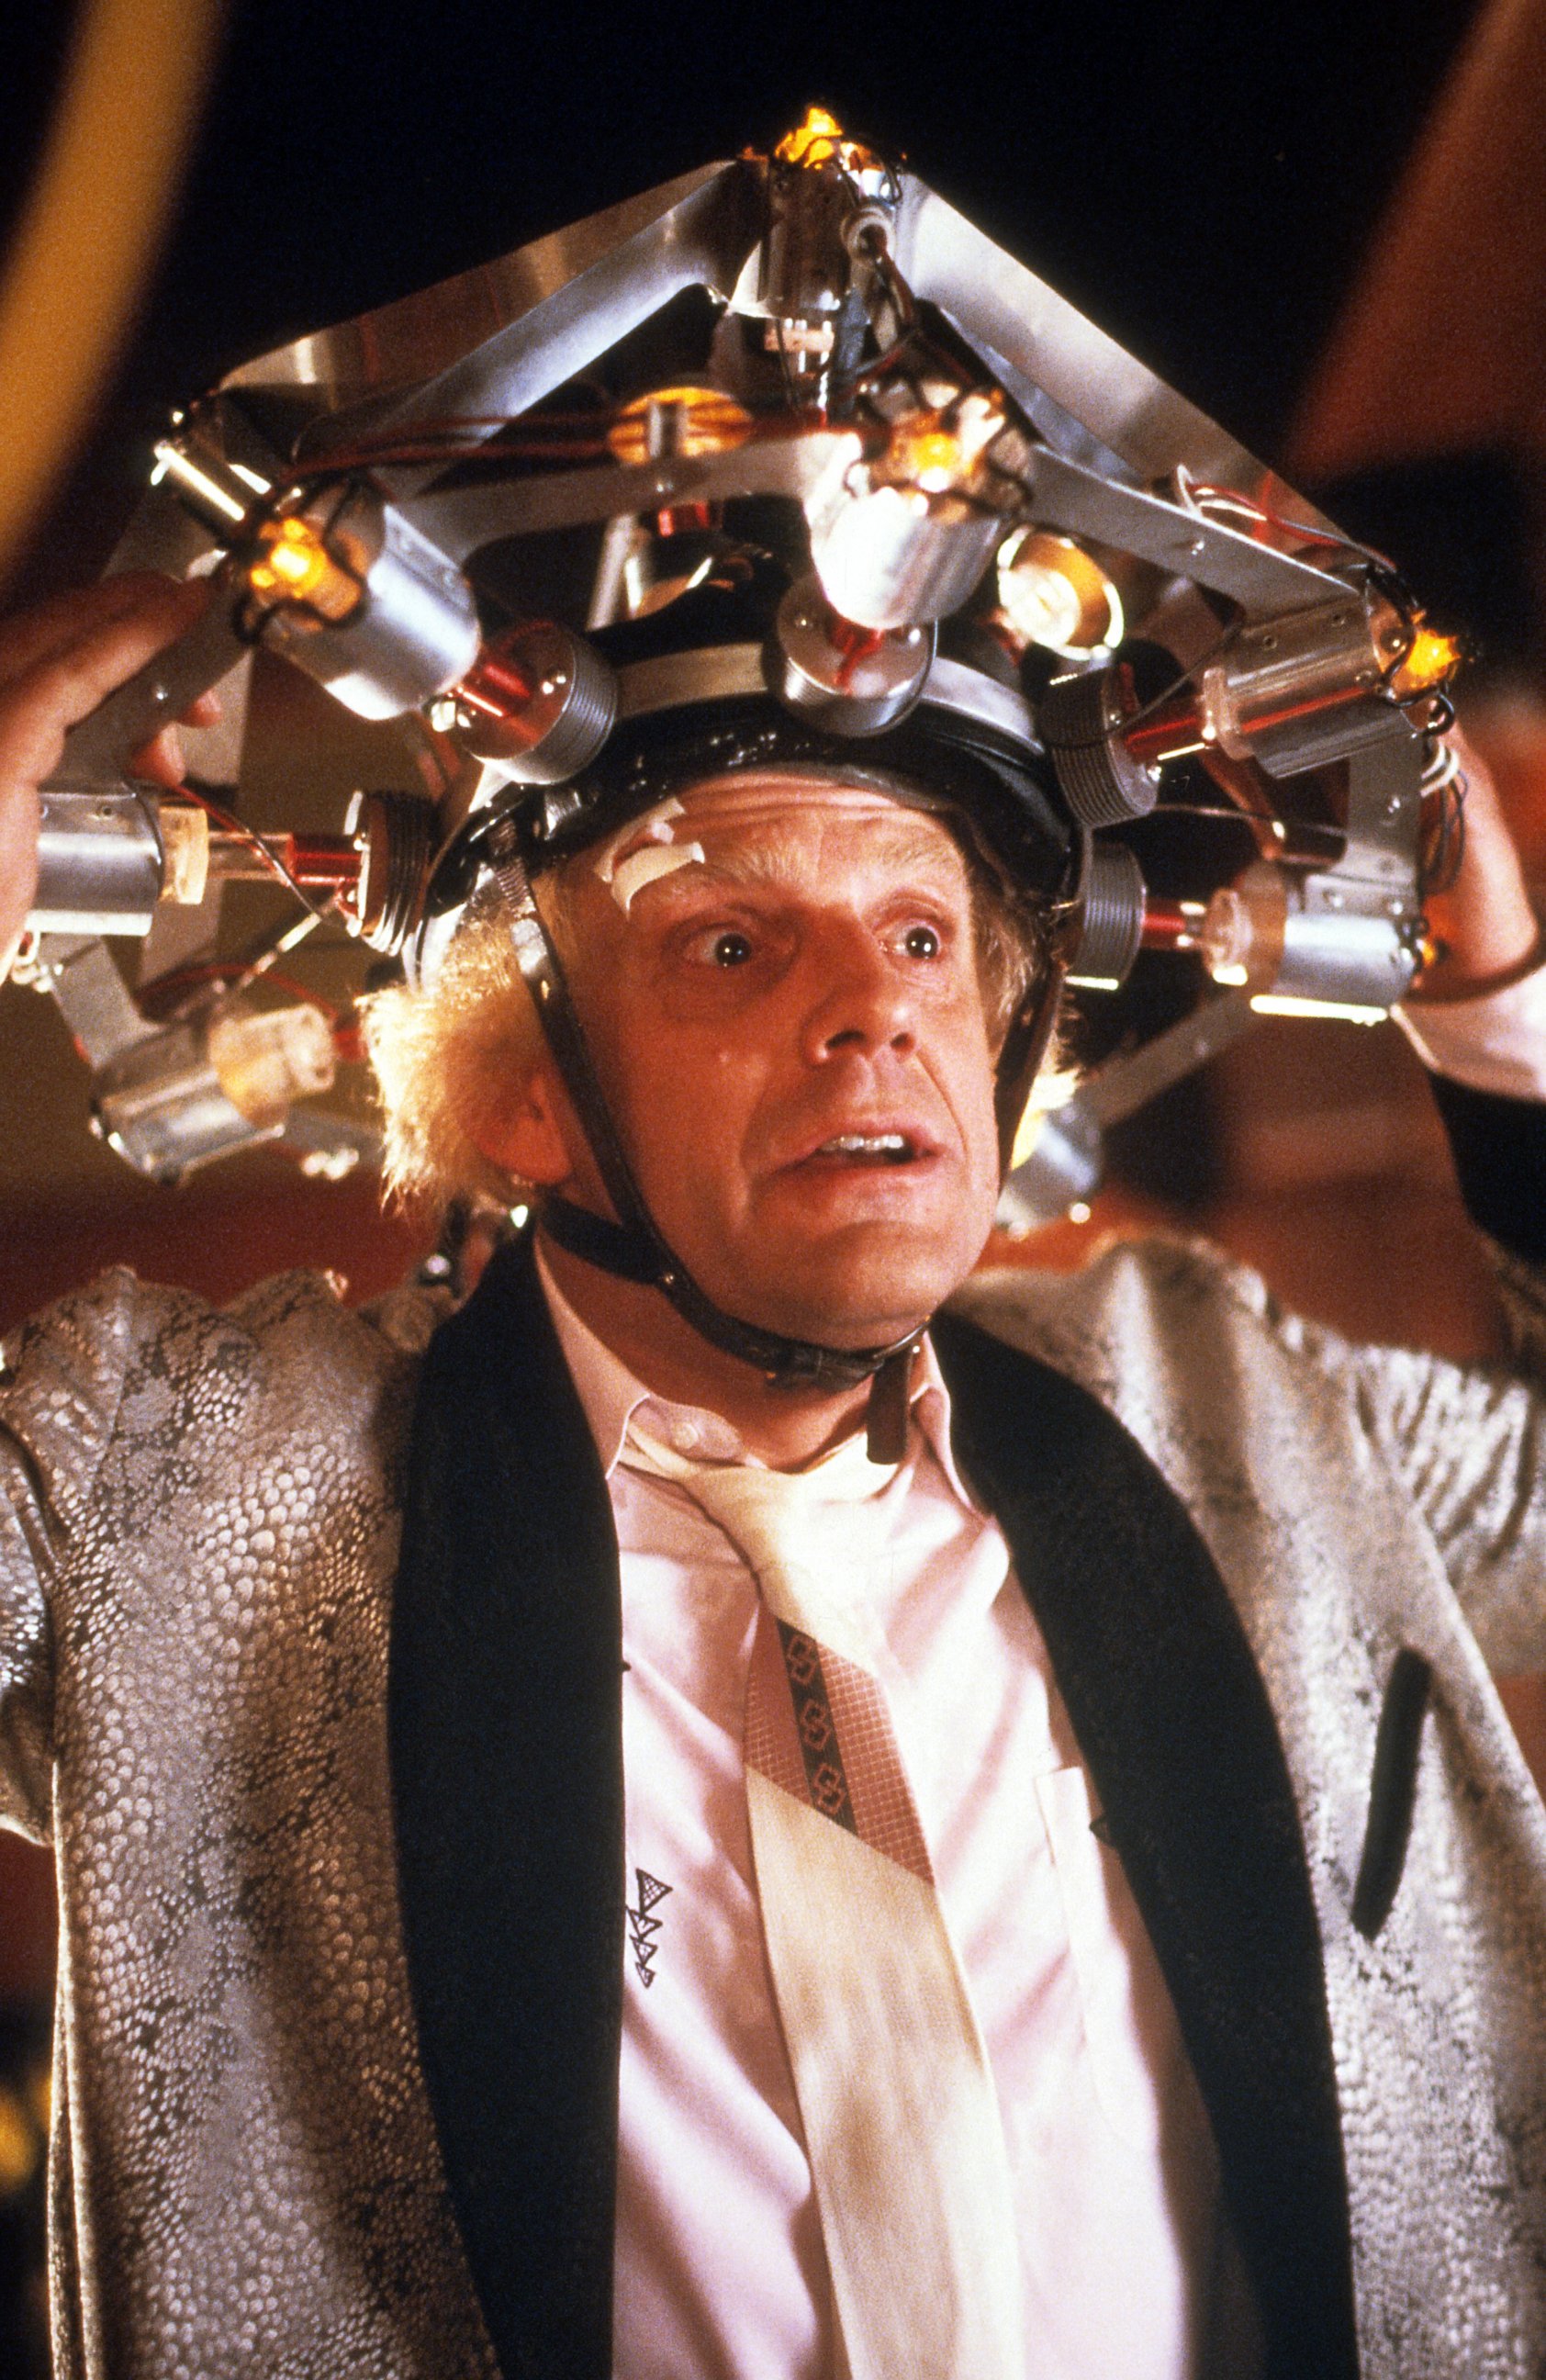 PHOTO: Christopher Lloyd wearing concoction on his head in a scene from the film 'Back To The Future', 1985.